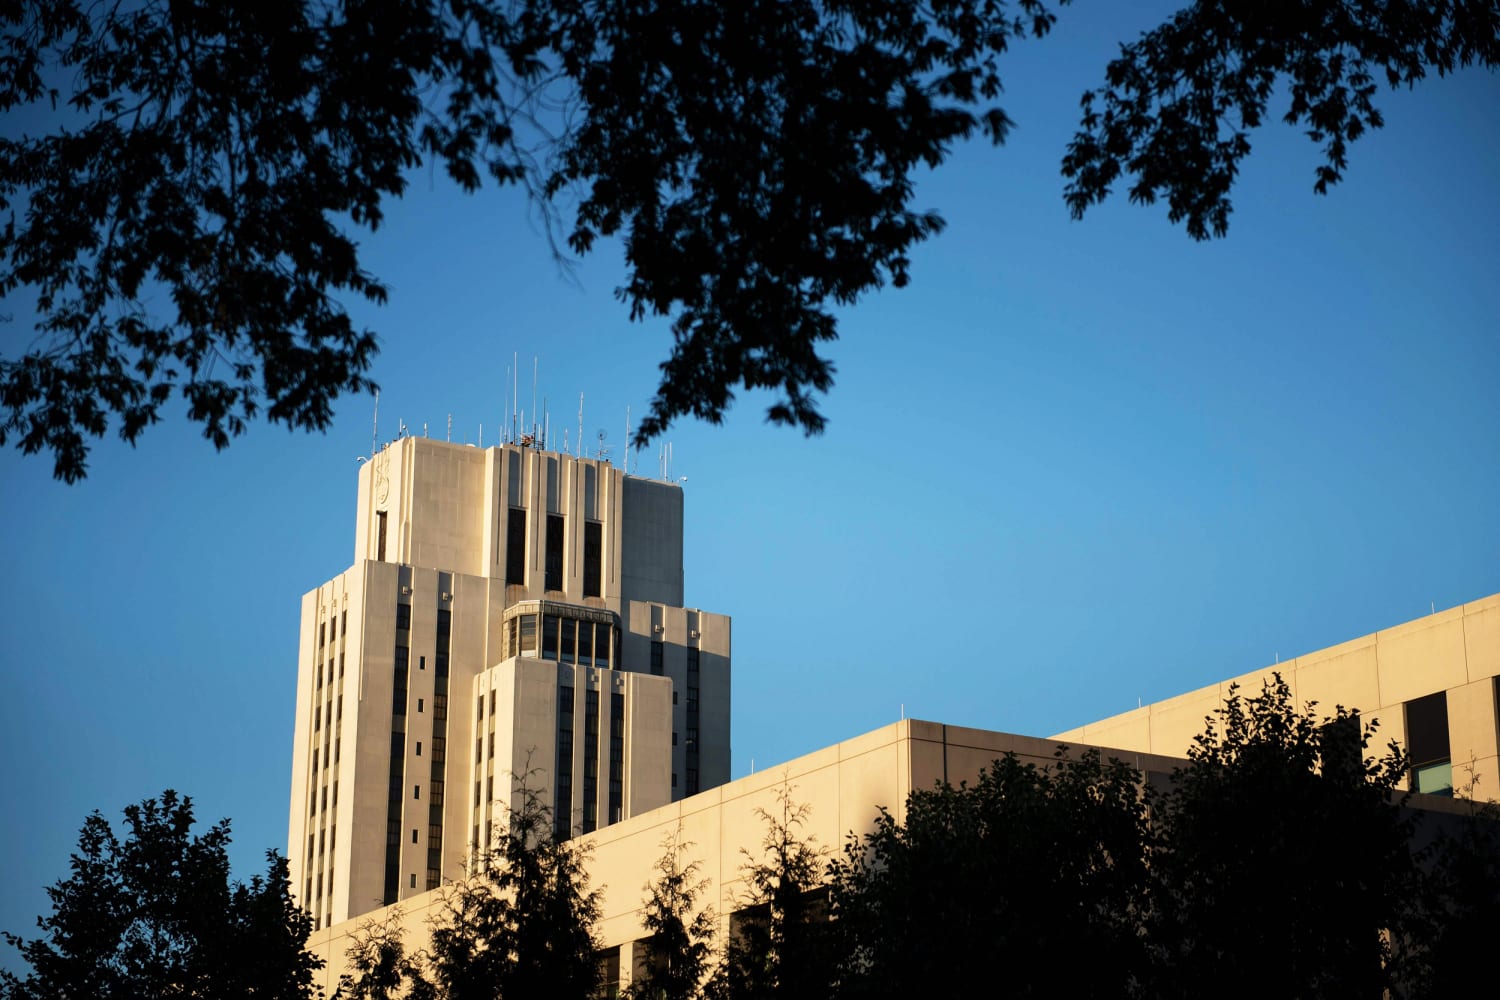 Walter Reed medical center: Inside the storied hospital where